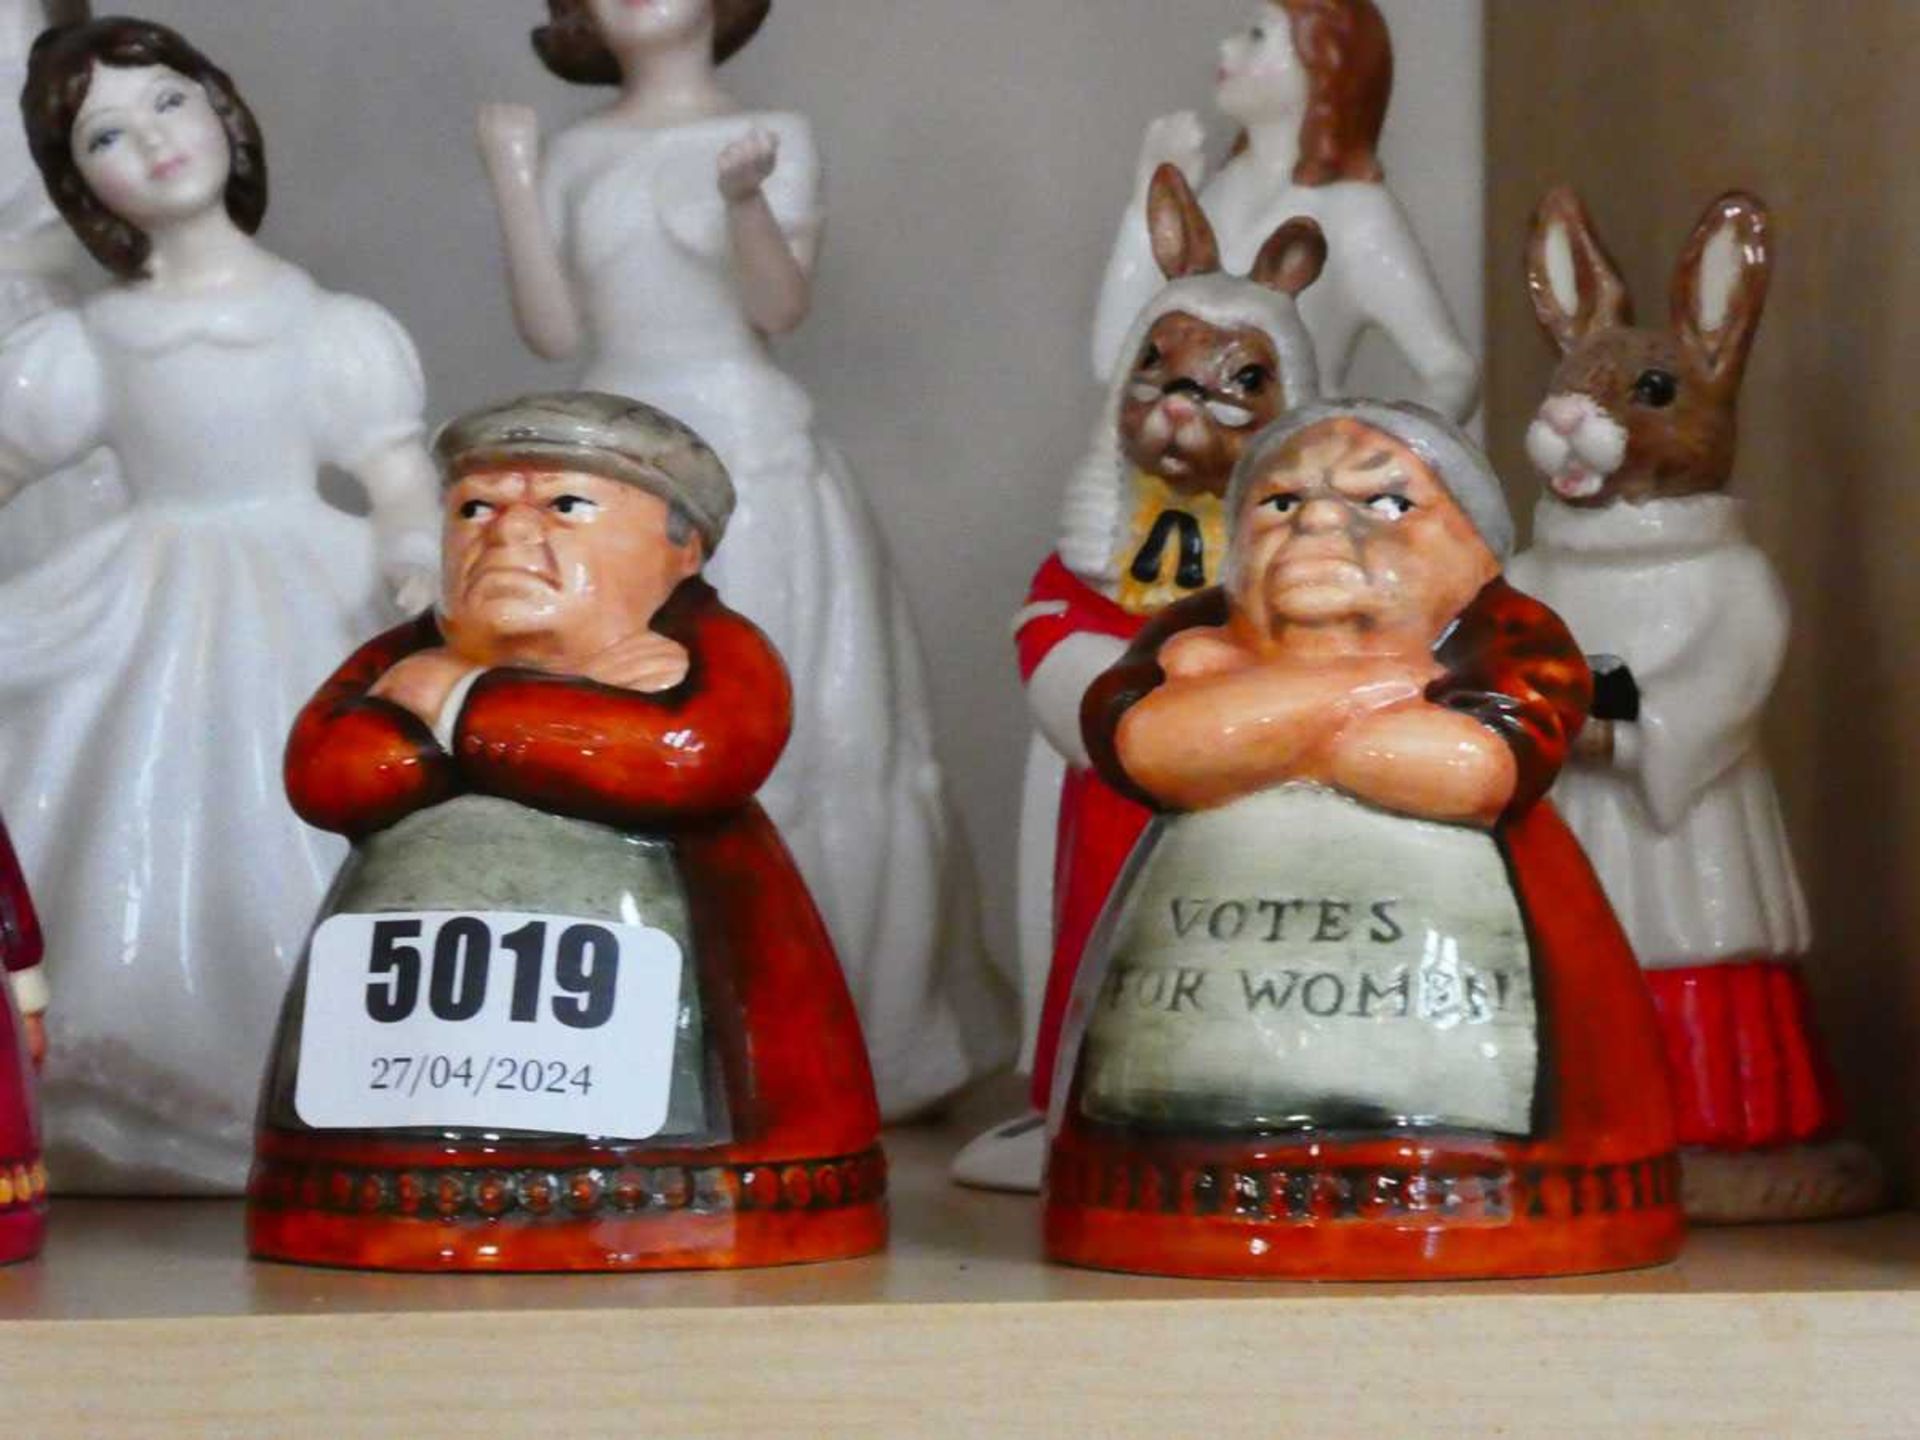 Small collection of Bunnykins, salt and pepper figures in the form of Votes for Women and Tweedledum - Image 3 of 3